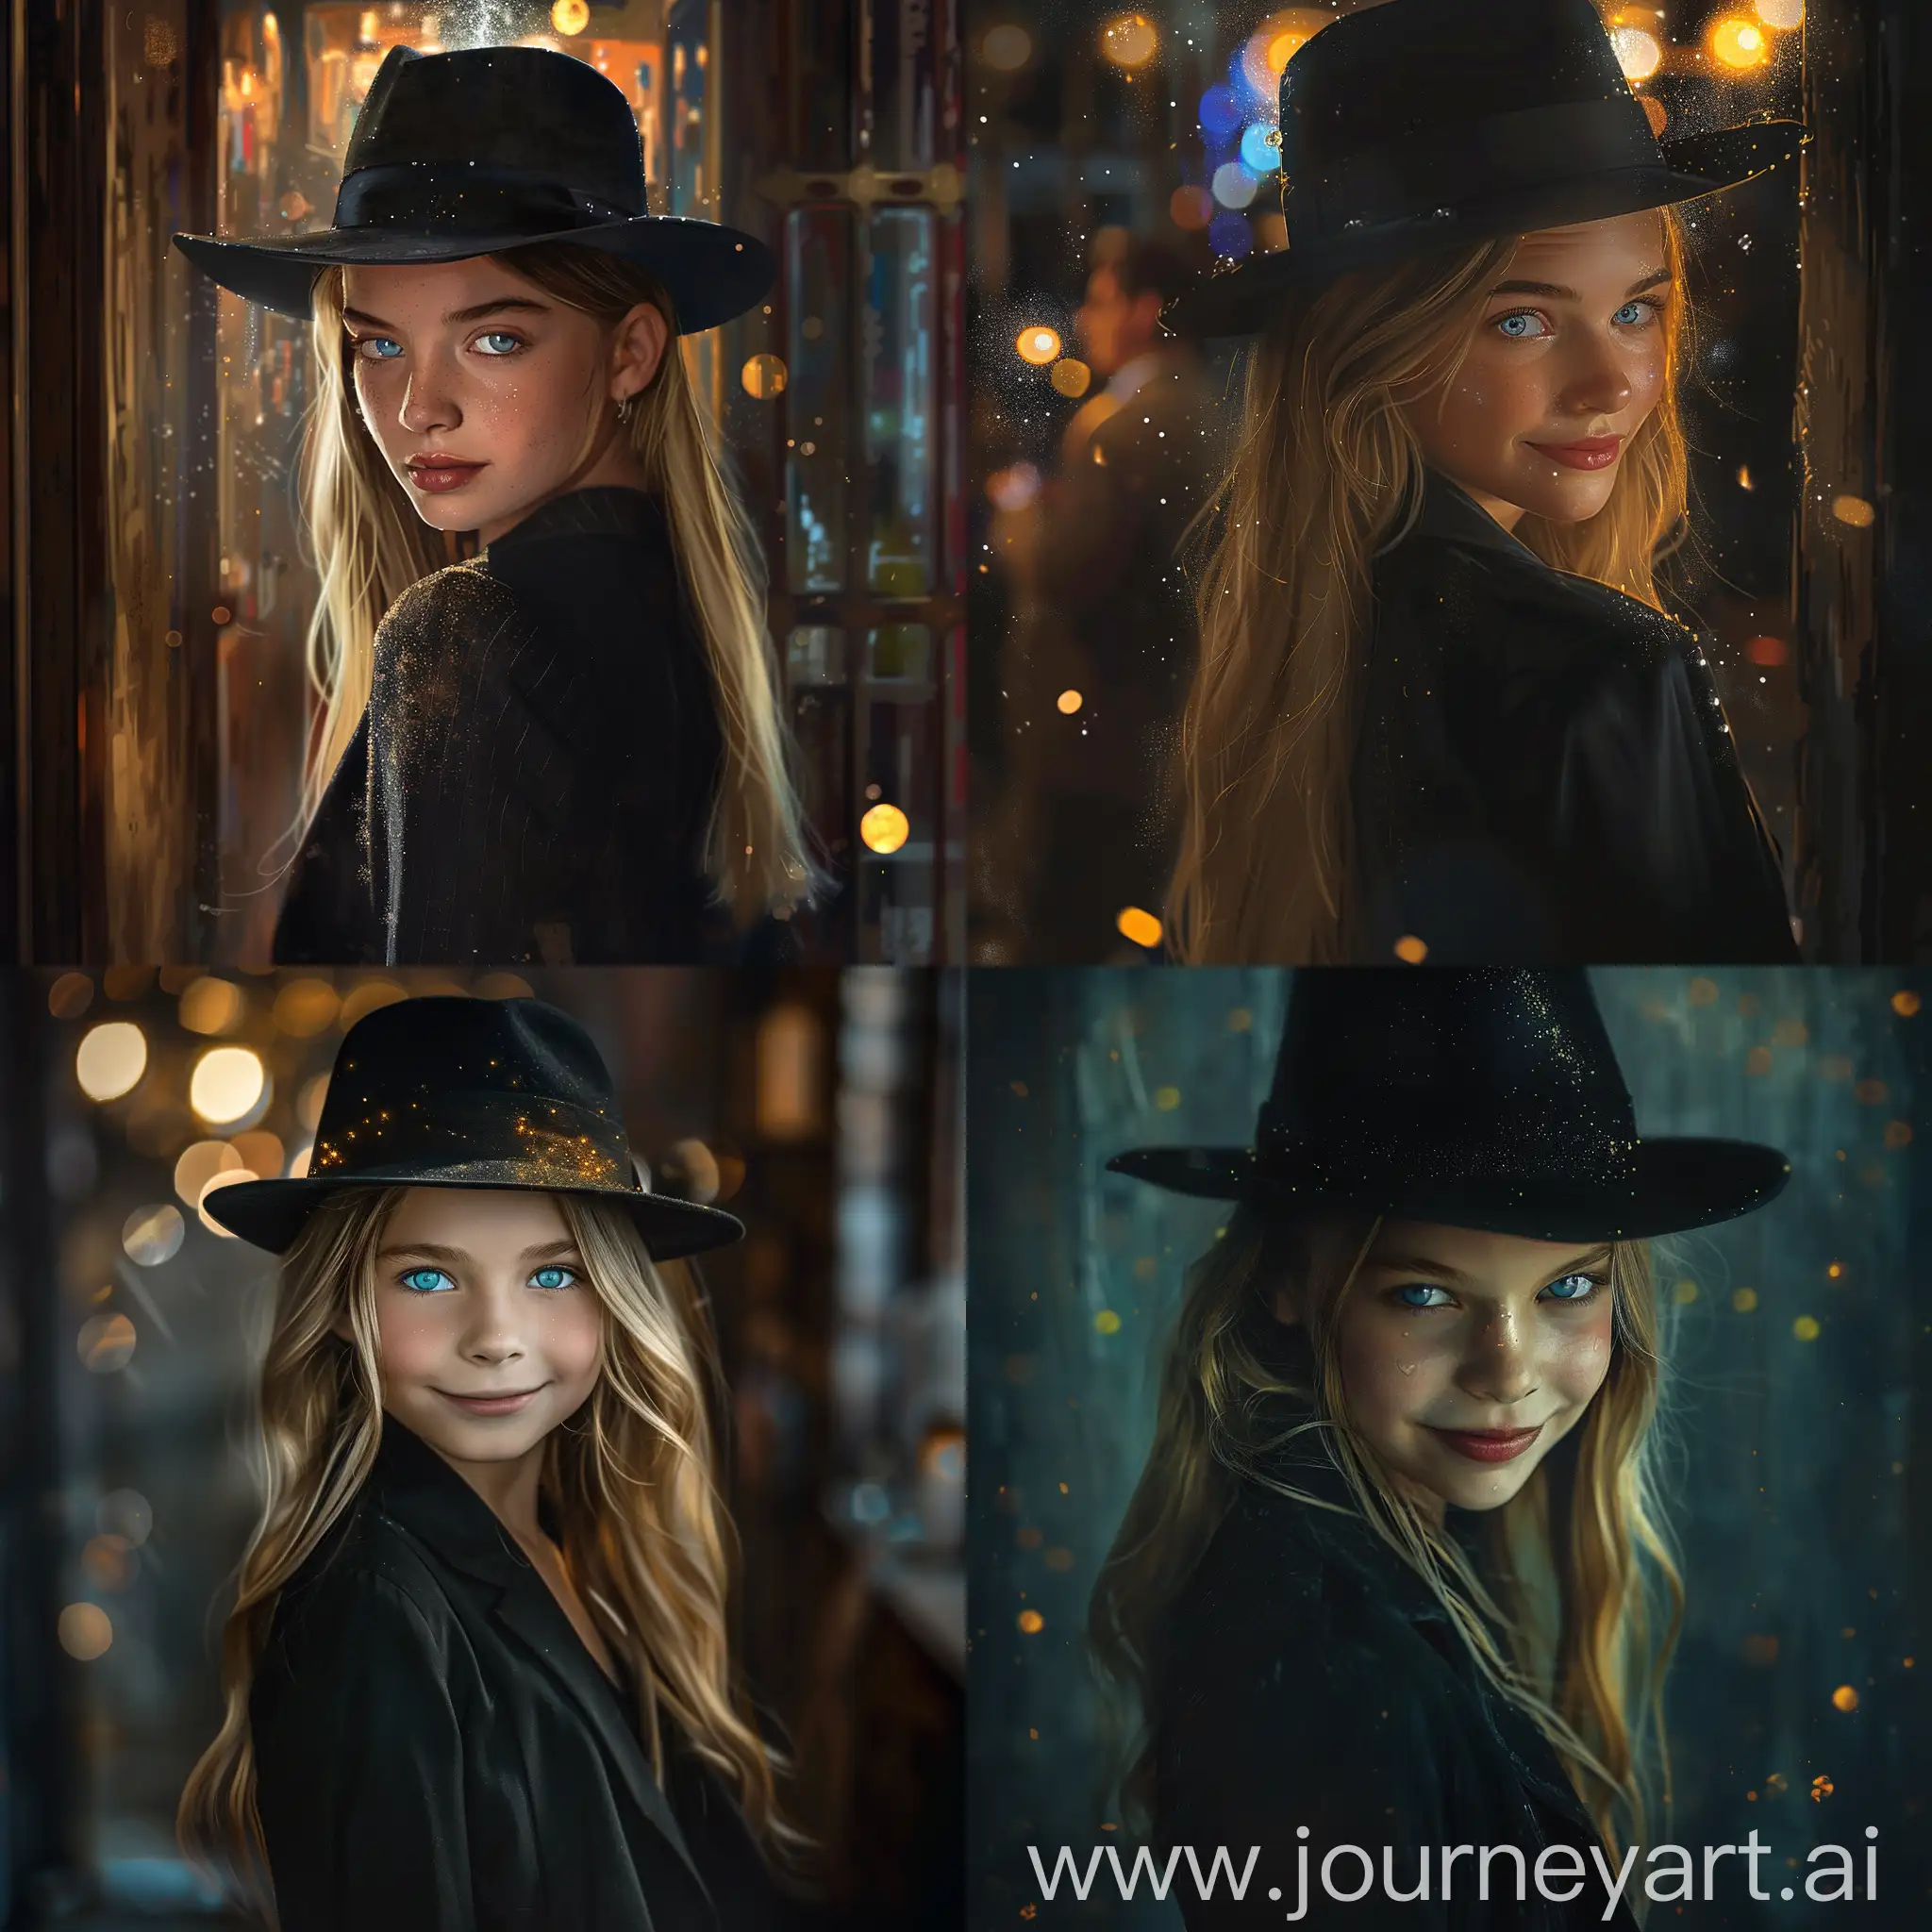 Fierce-Nordic-Girl-in-Tango-Suit-and-Fedora-Hat-Captivating-Portrait-of-Determination-and-Strength